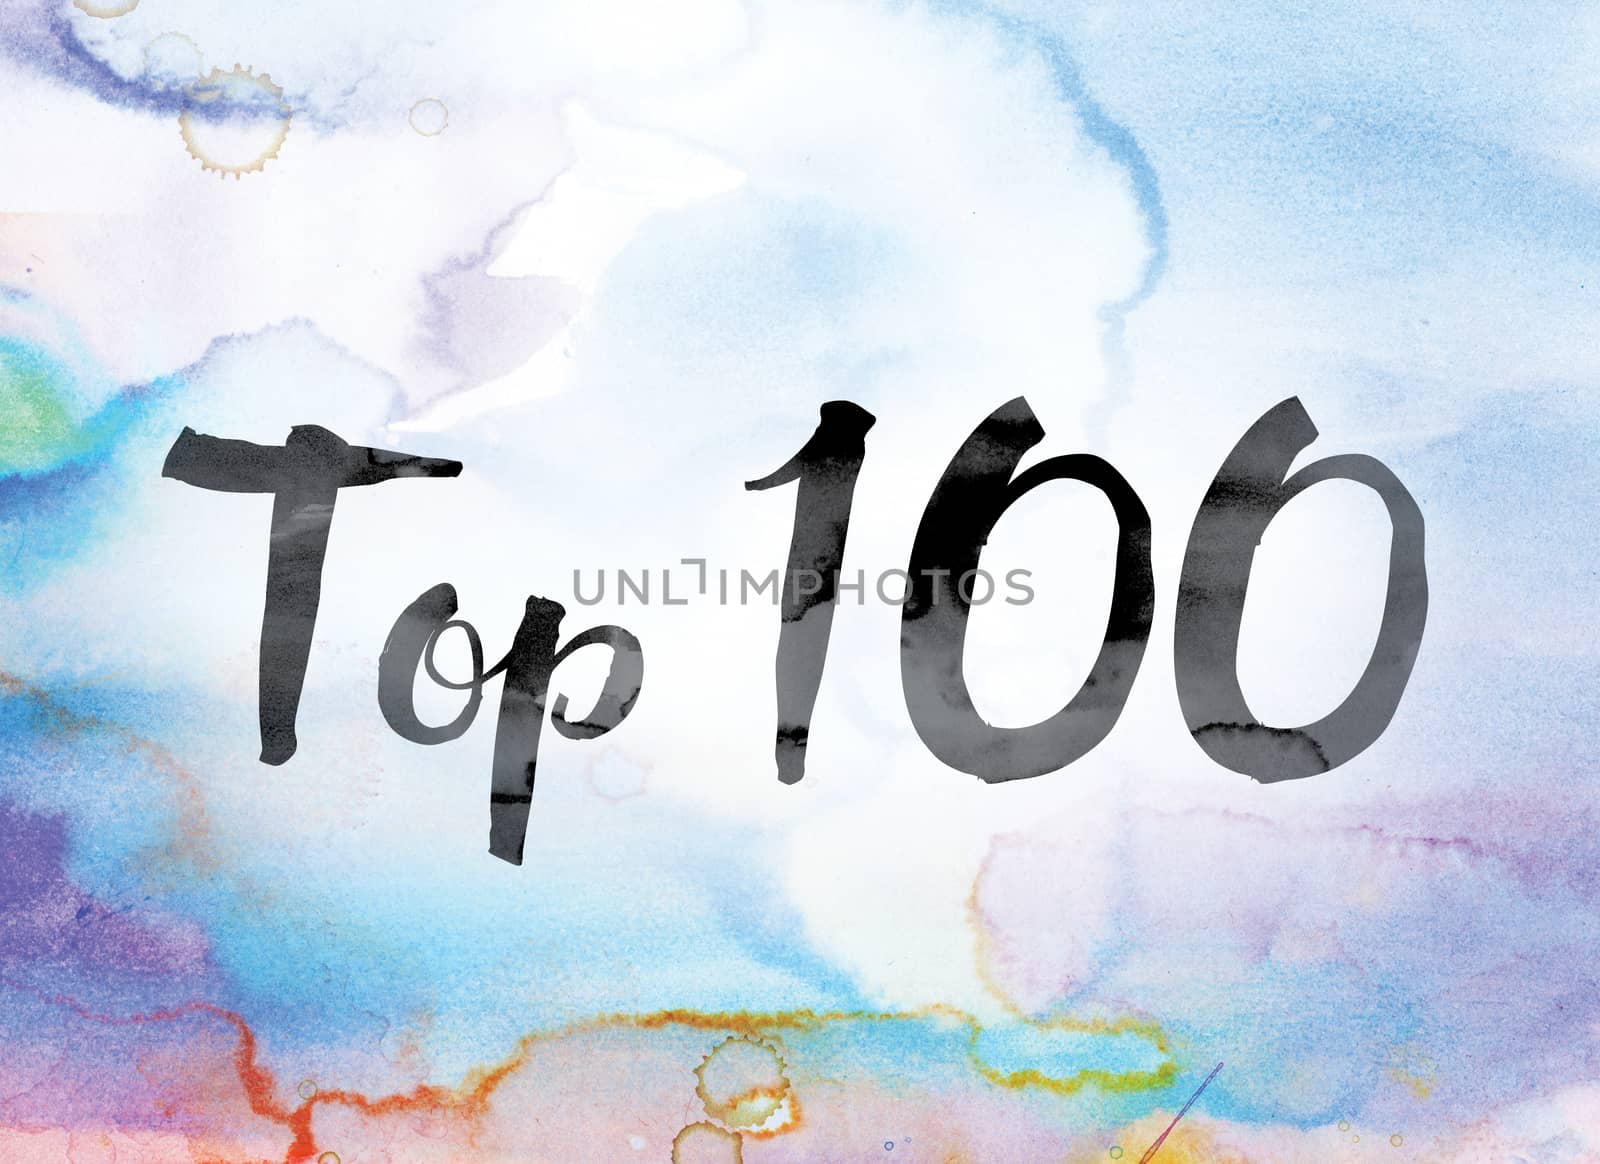 The word "Top 100" painted in black ink over a colorful watercolor washed background concept and theme.